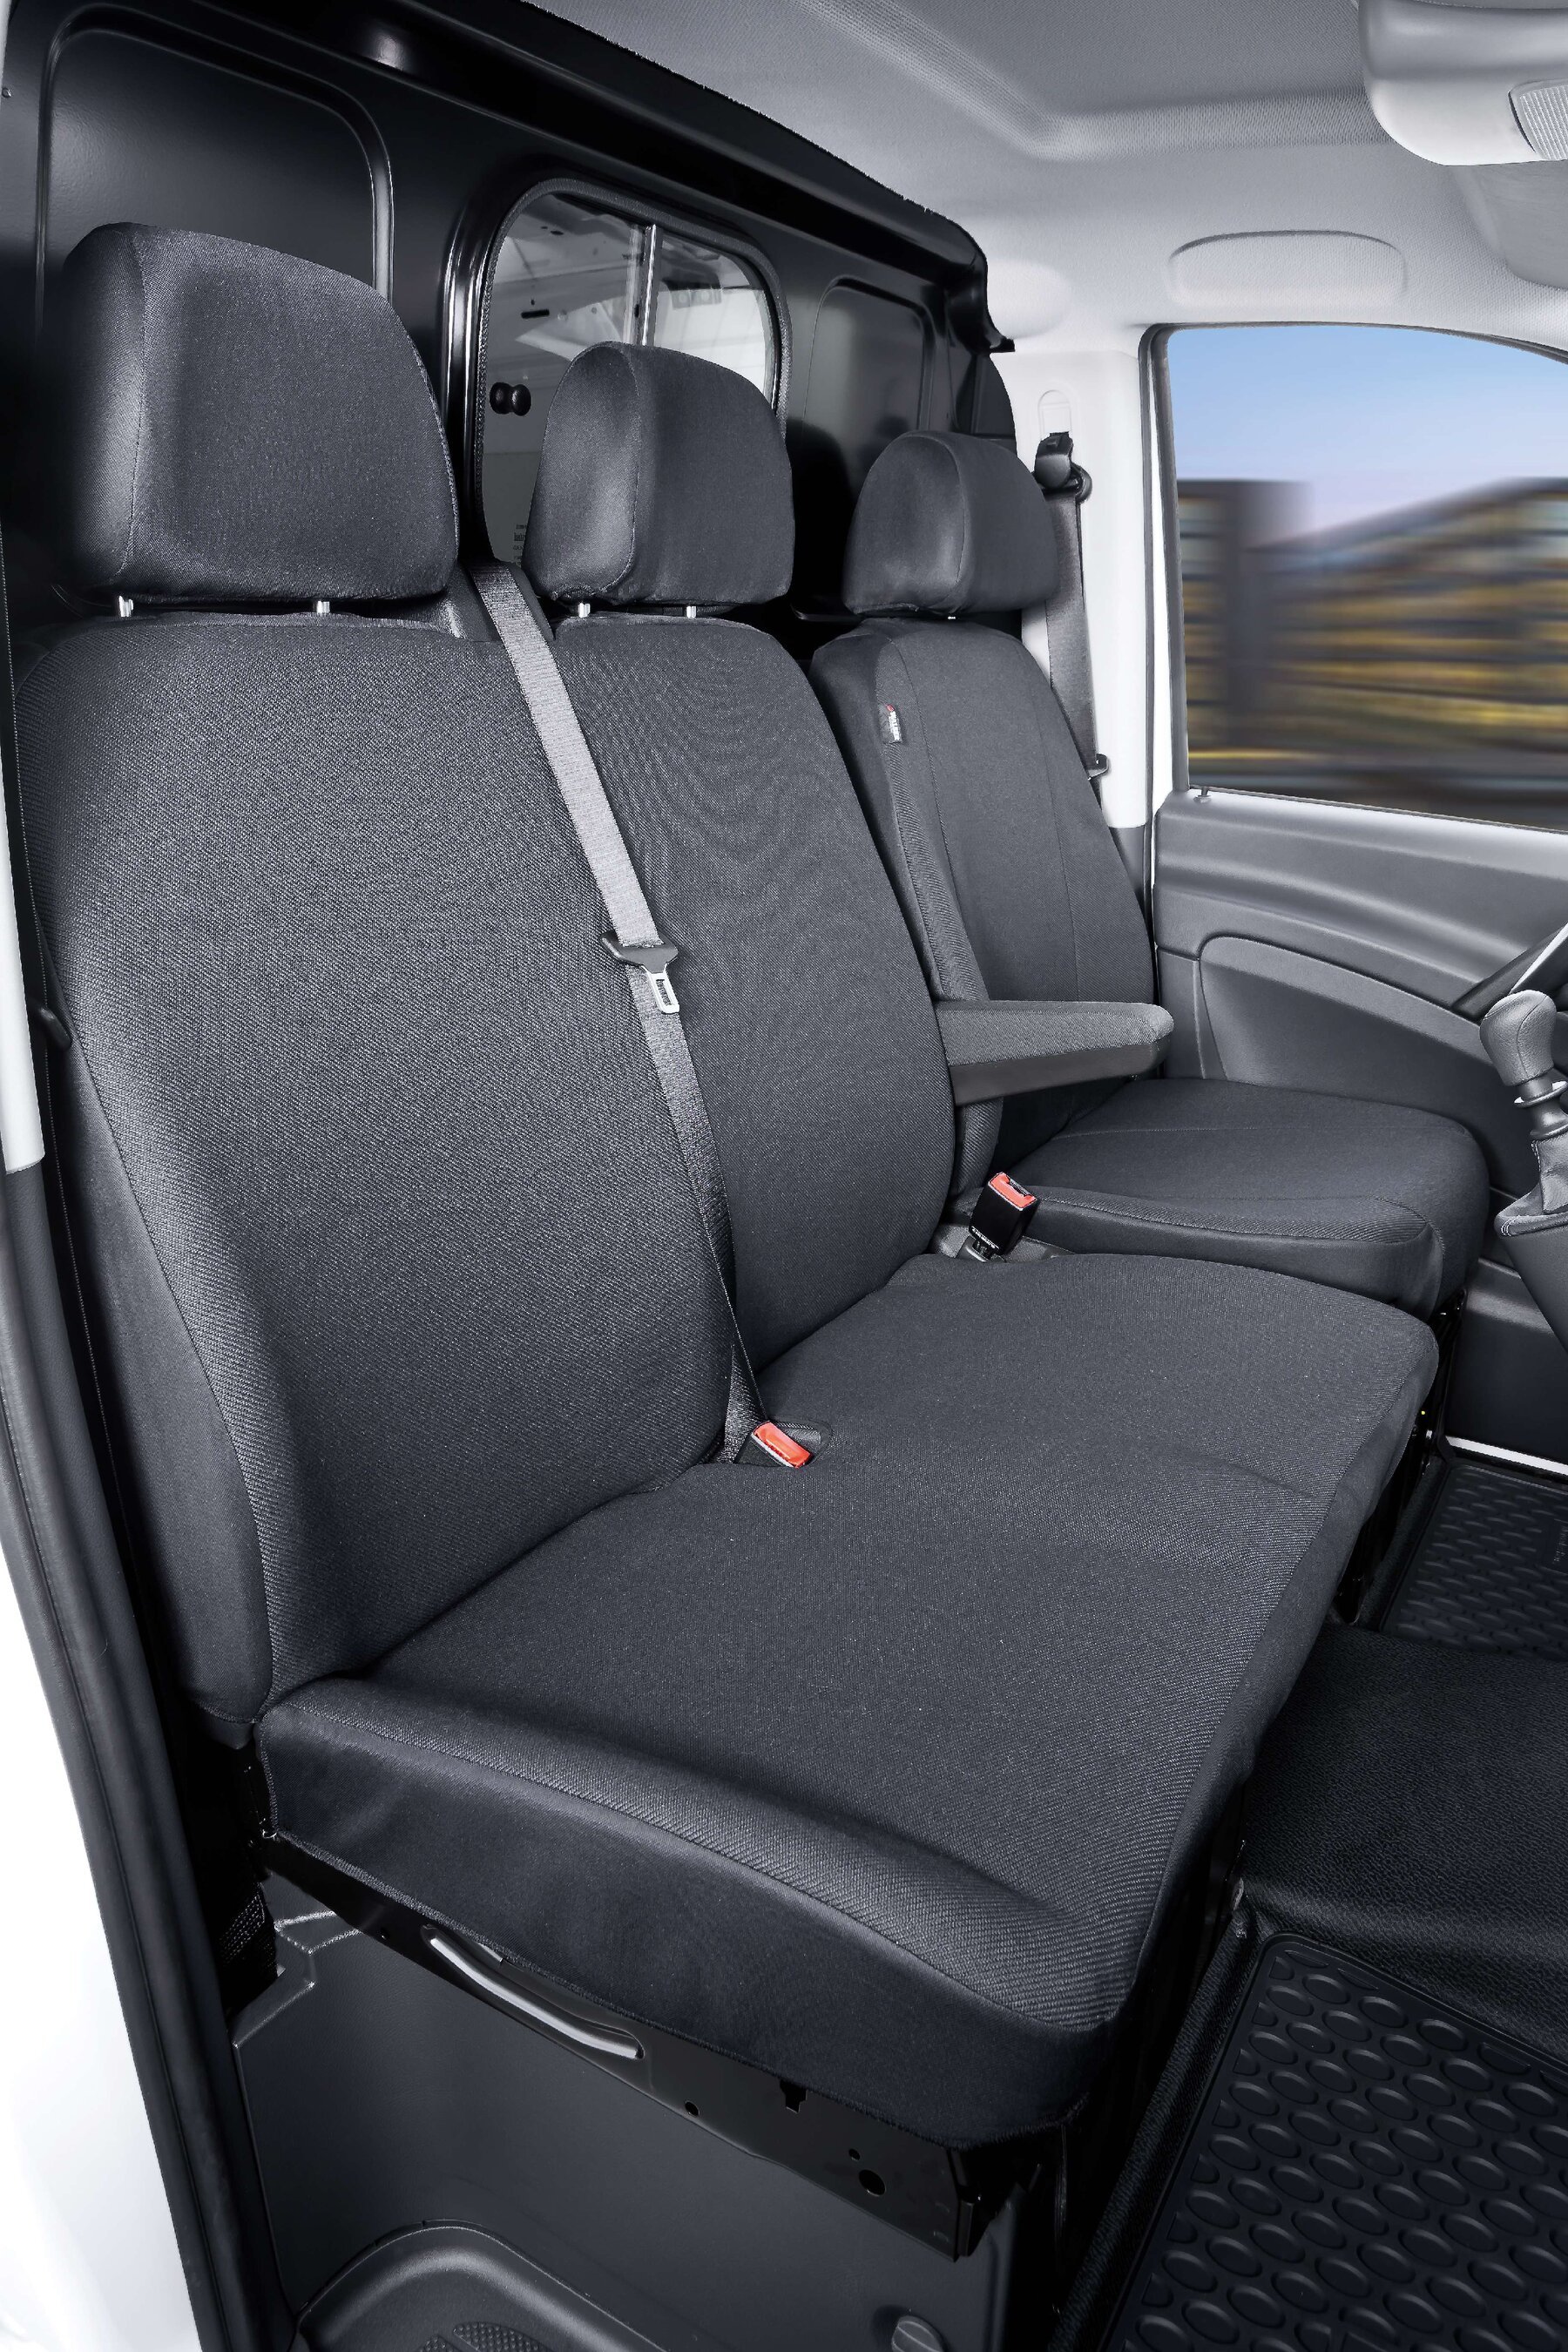 Seat cover made of fabric for Mercedes Vito/Viano, single seat cover front